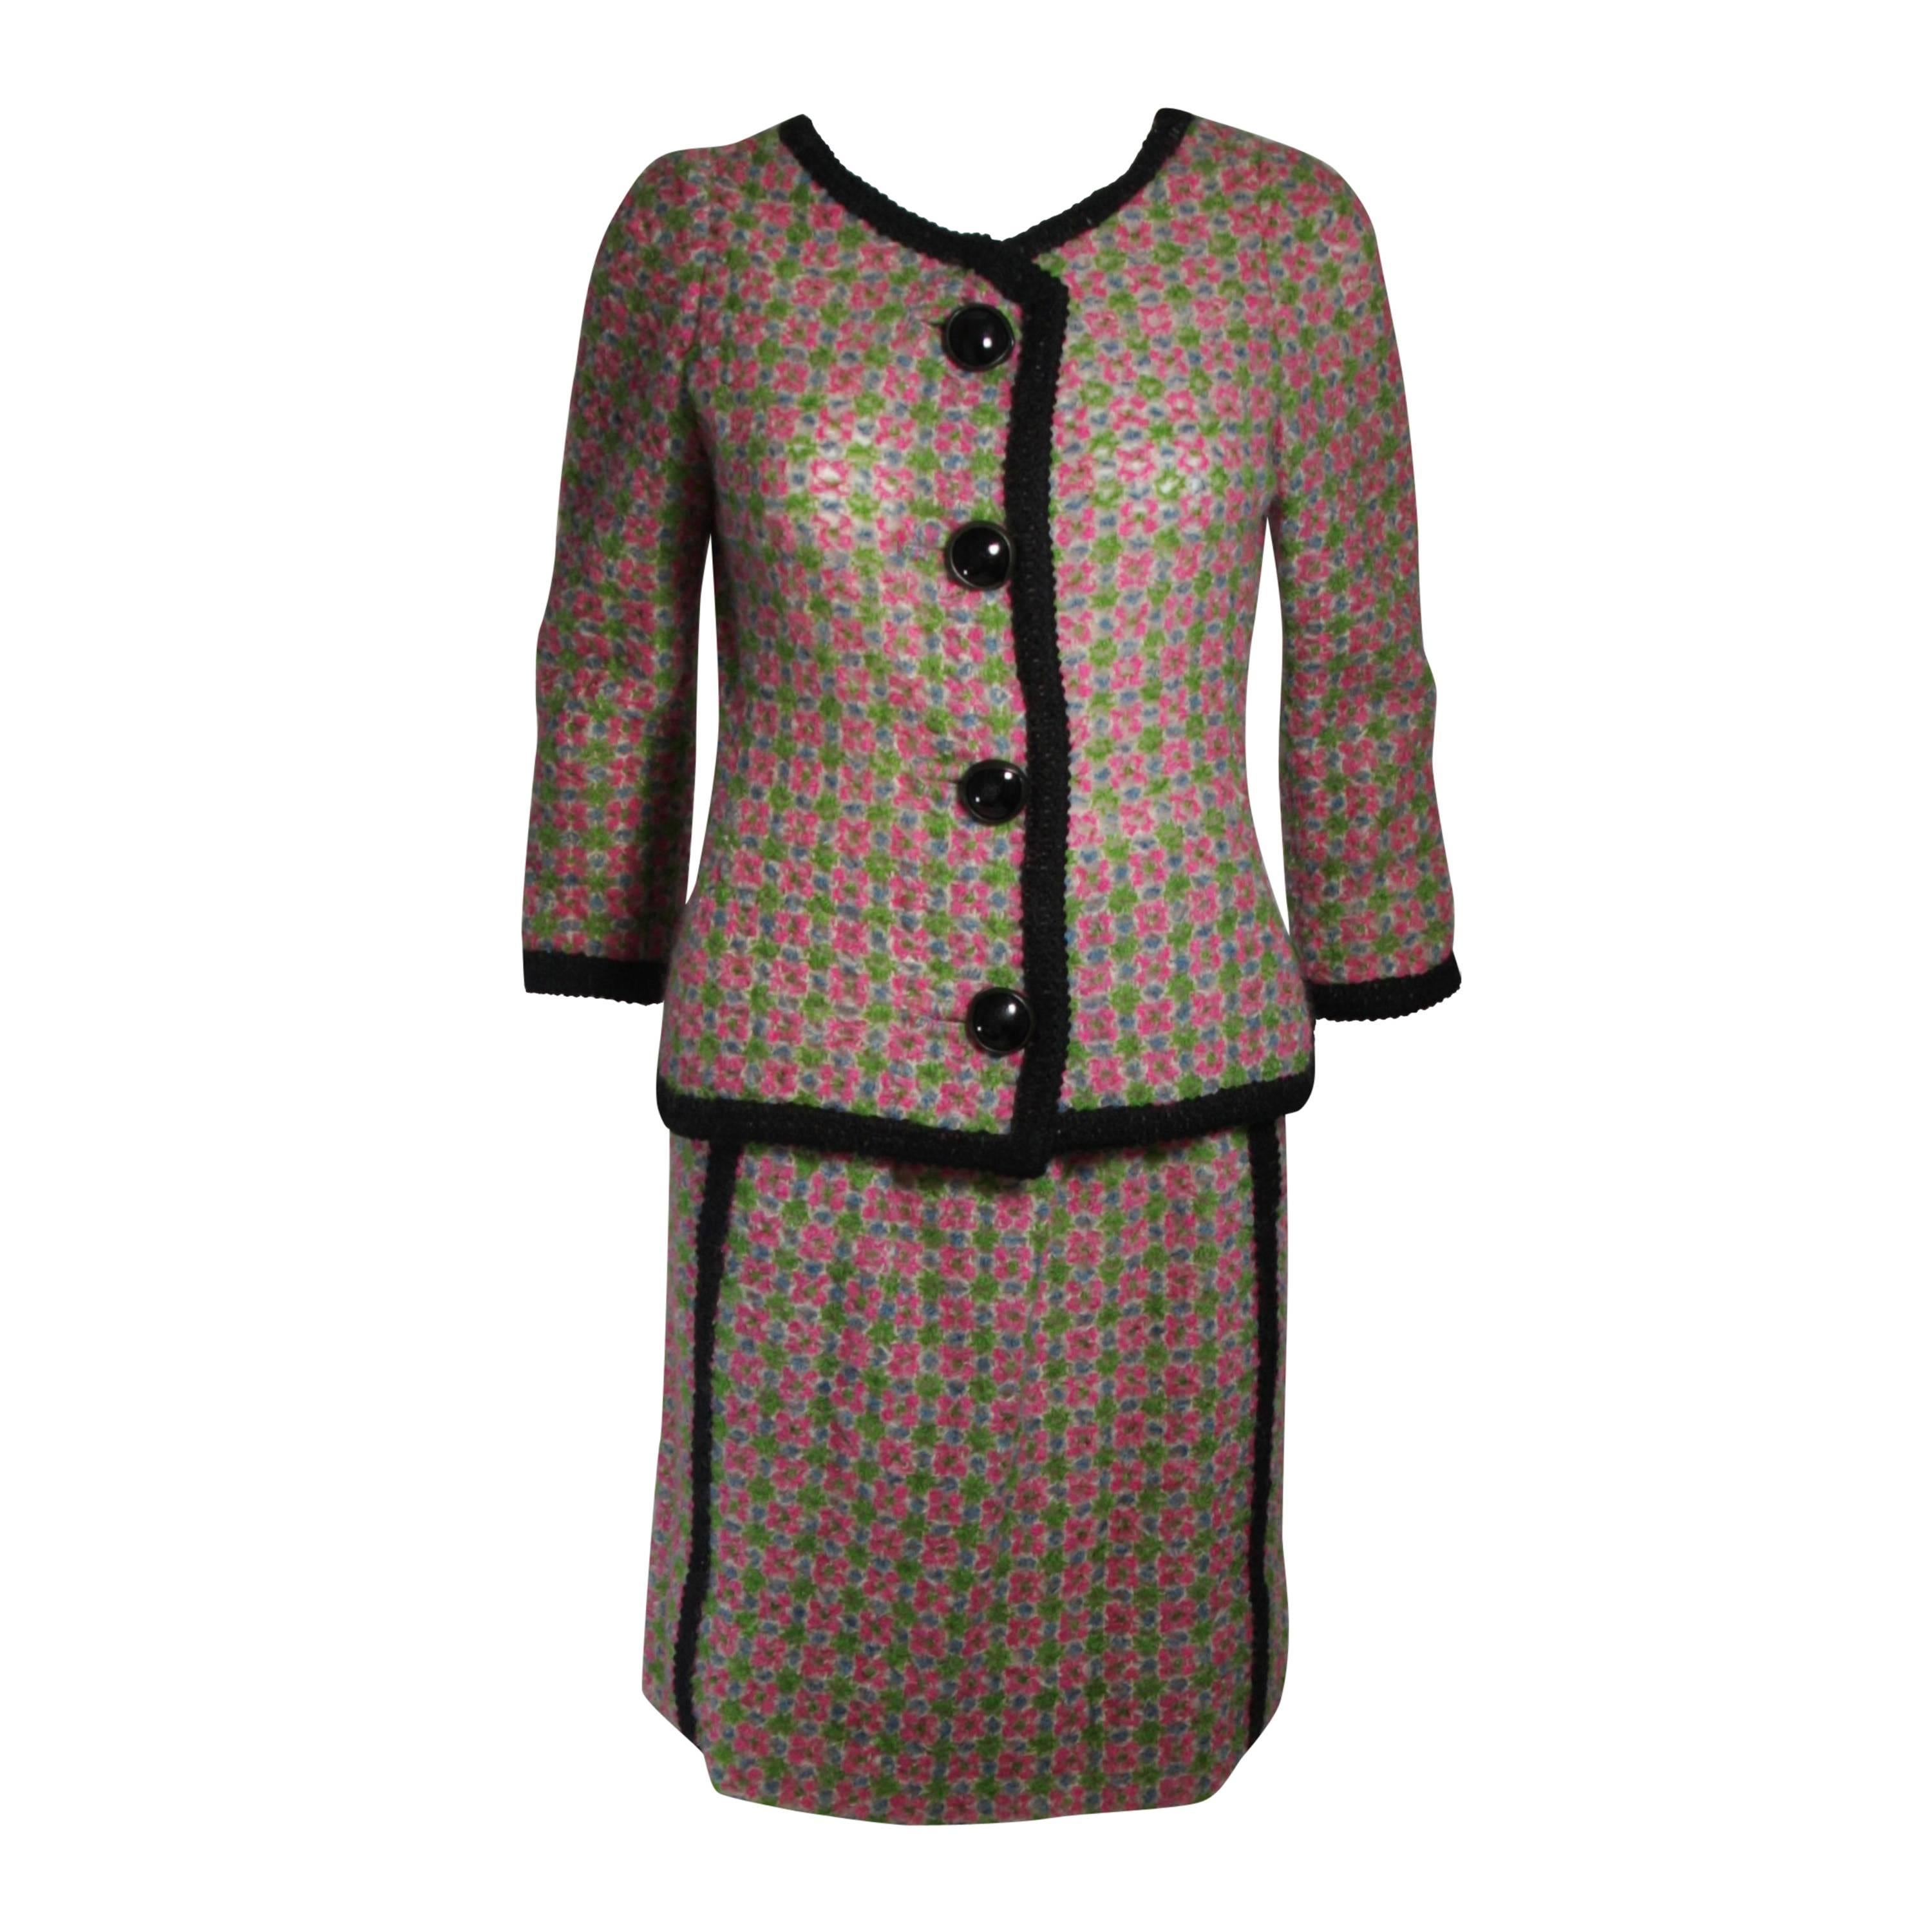 Galanos Wool Skirt Suit in Green Pink White and Black Size Small Medium For Sale